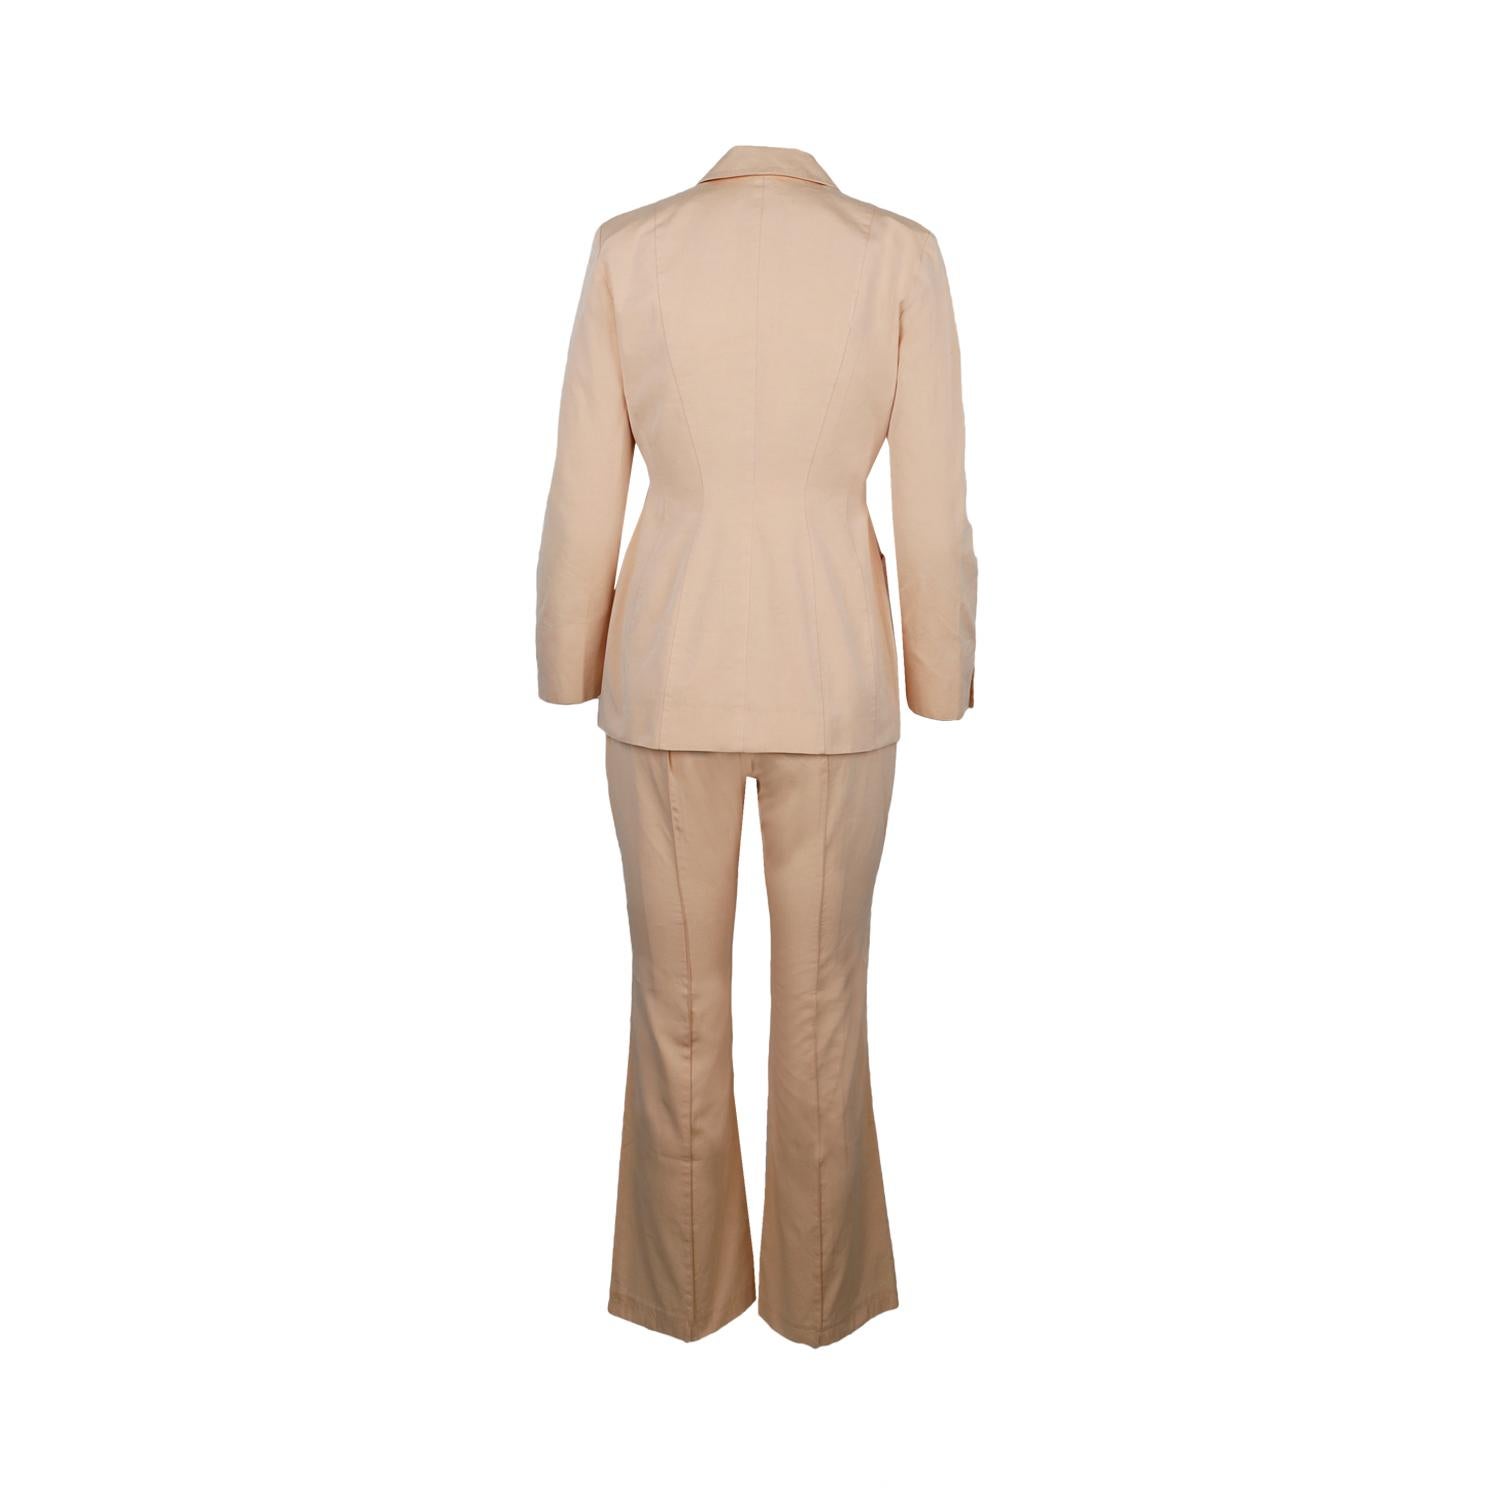 Thierry Mugler pink tailleur featuring slim fitting double-breasted jacket, long sleeves, button fastening, front pockets and flared trousers.

Total length - 71.5
Bust - 42.5
Waist - 33
Hips - 46
Shoulder - 38.5
Sleeve - 58.5